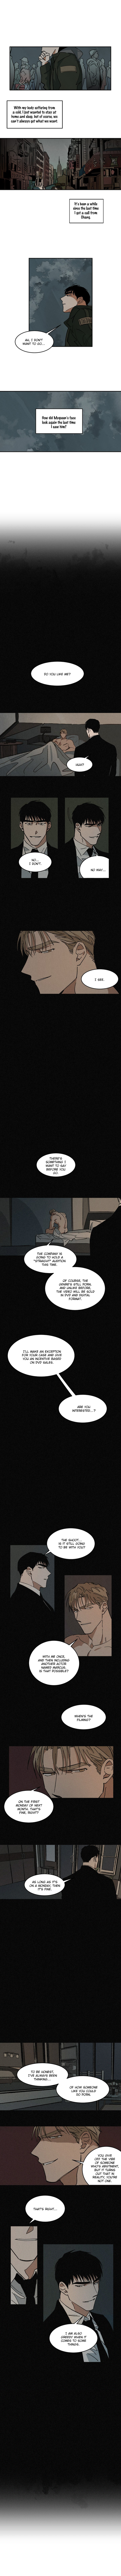 Walk On Water - Page 1